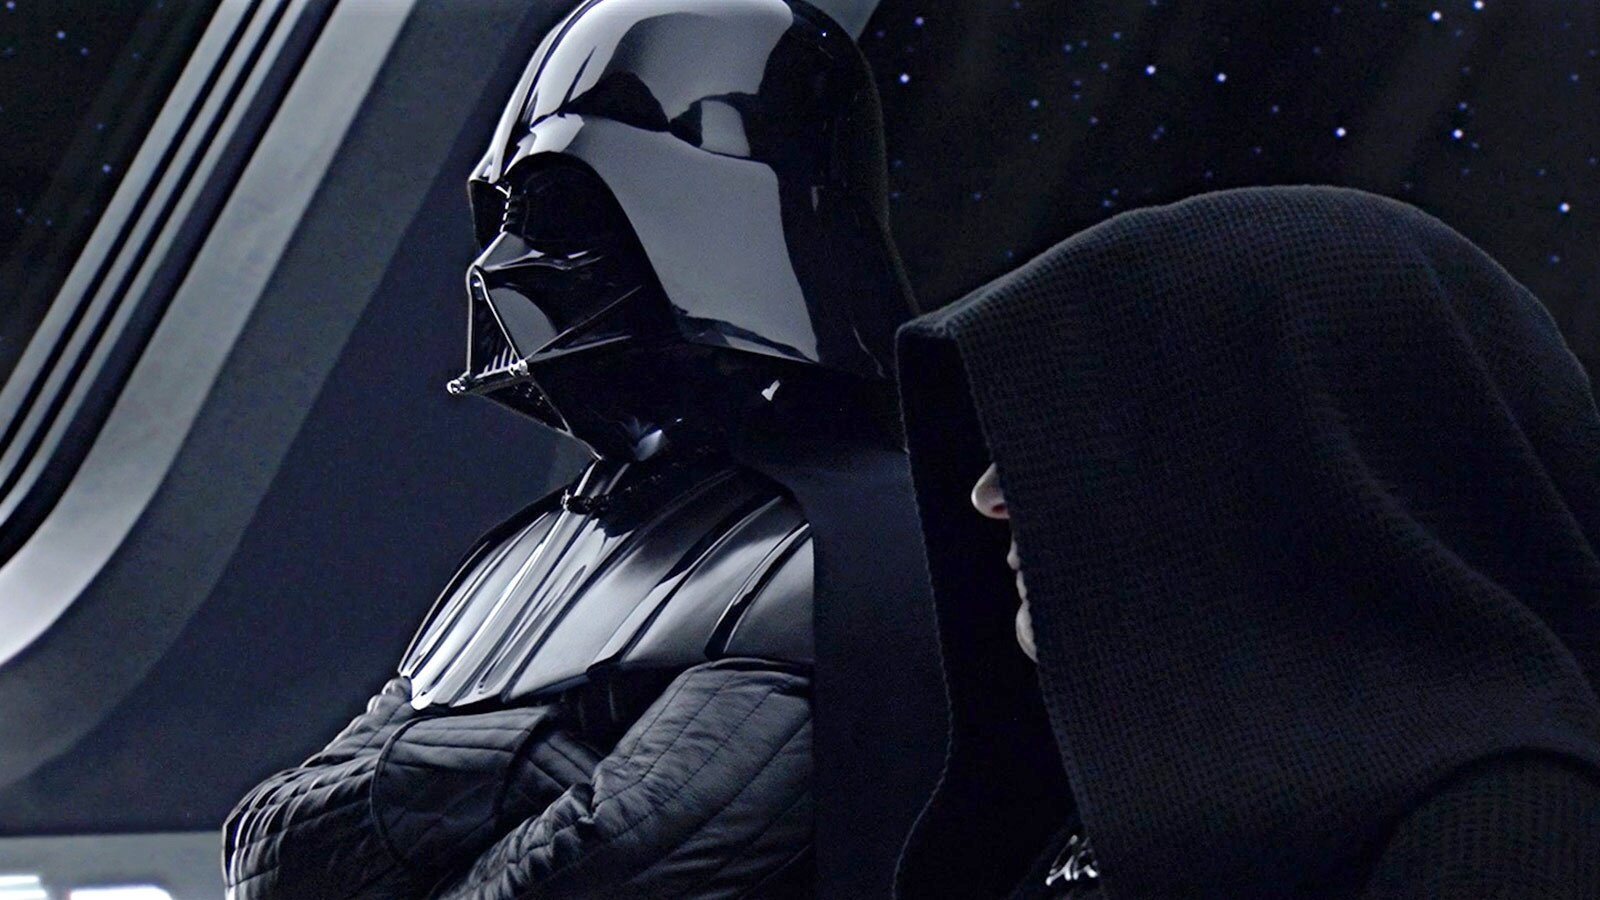 Darth Vader and Darth Sidious/Emperor Palpatine in Star Wars: Revenge of the Sith's epilogue